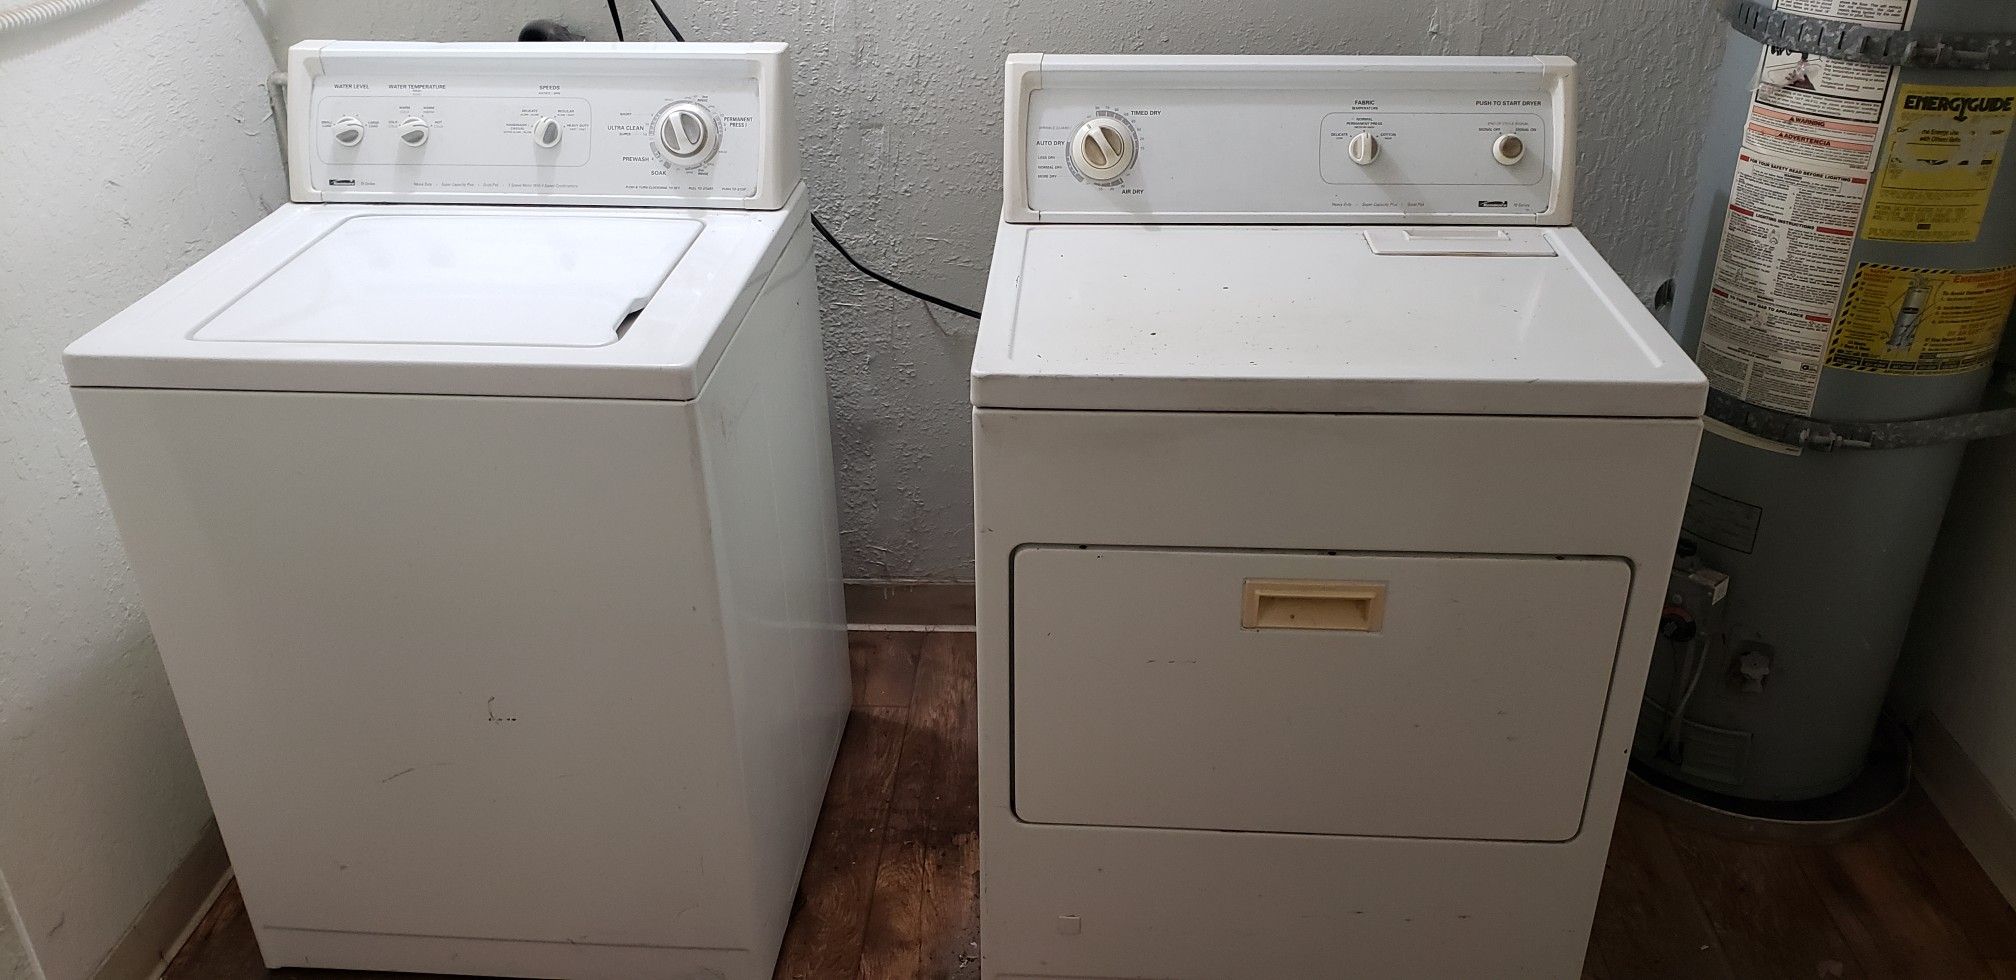 Electric washer and gas dryer